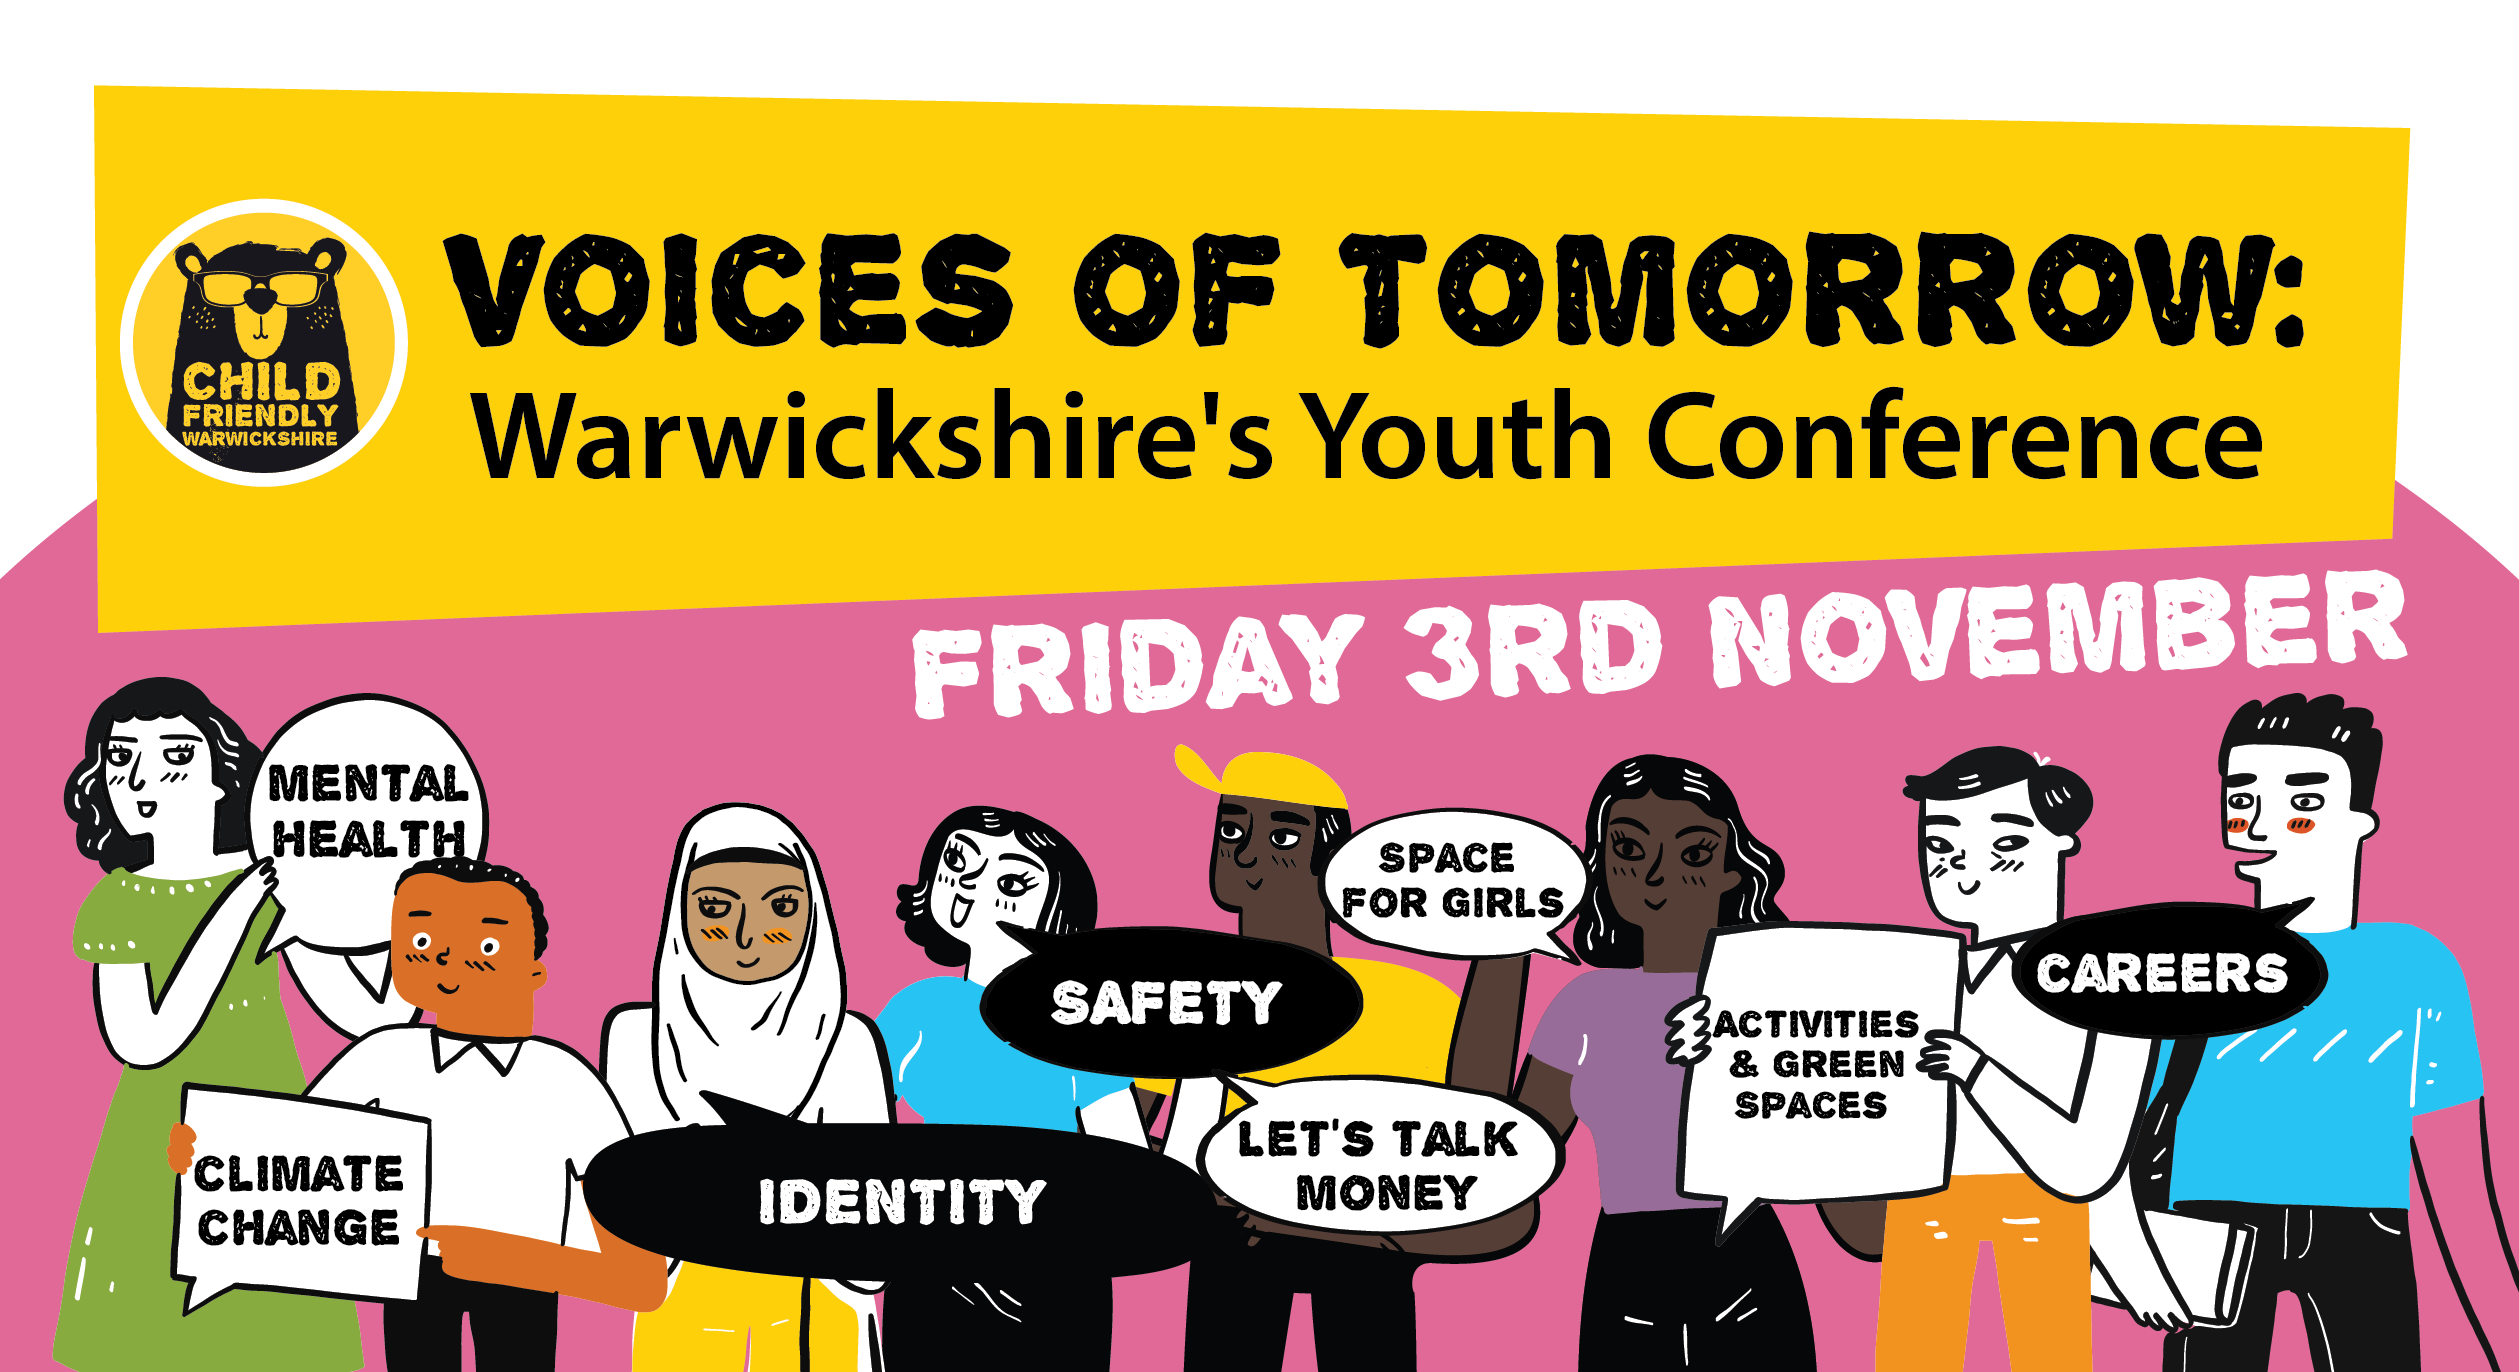 Voices of tomorrow conference promotional image